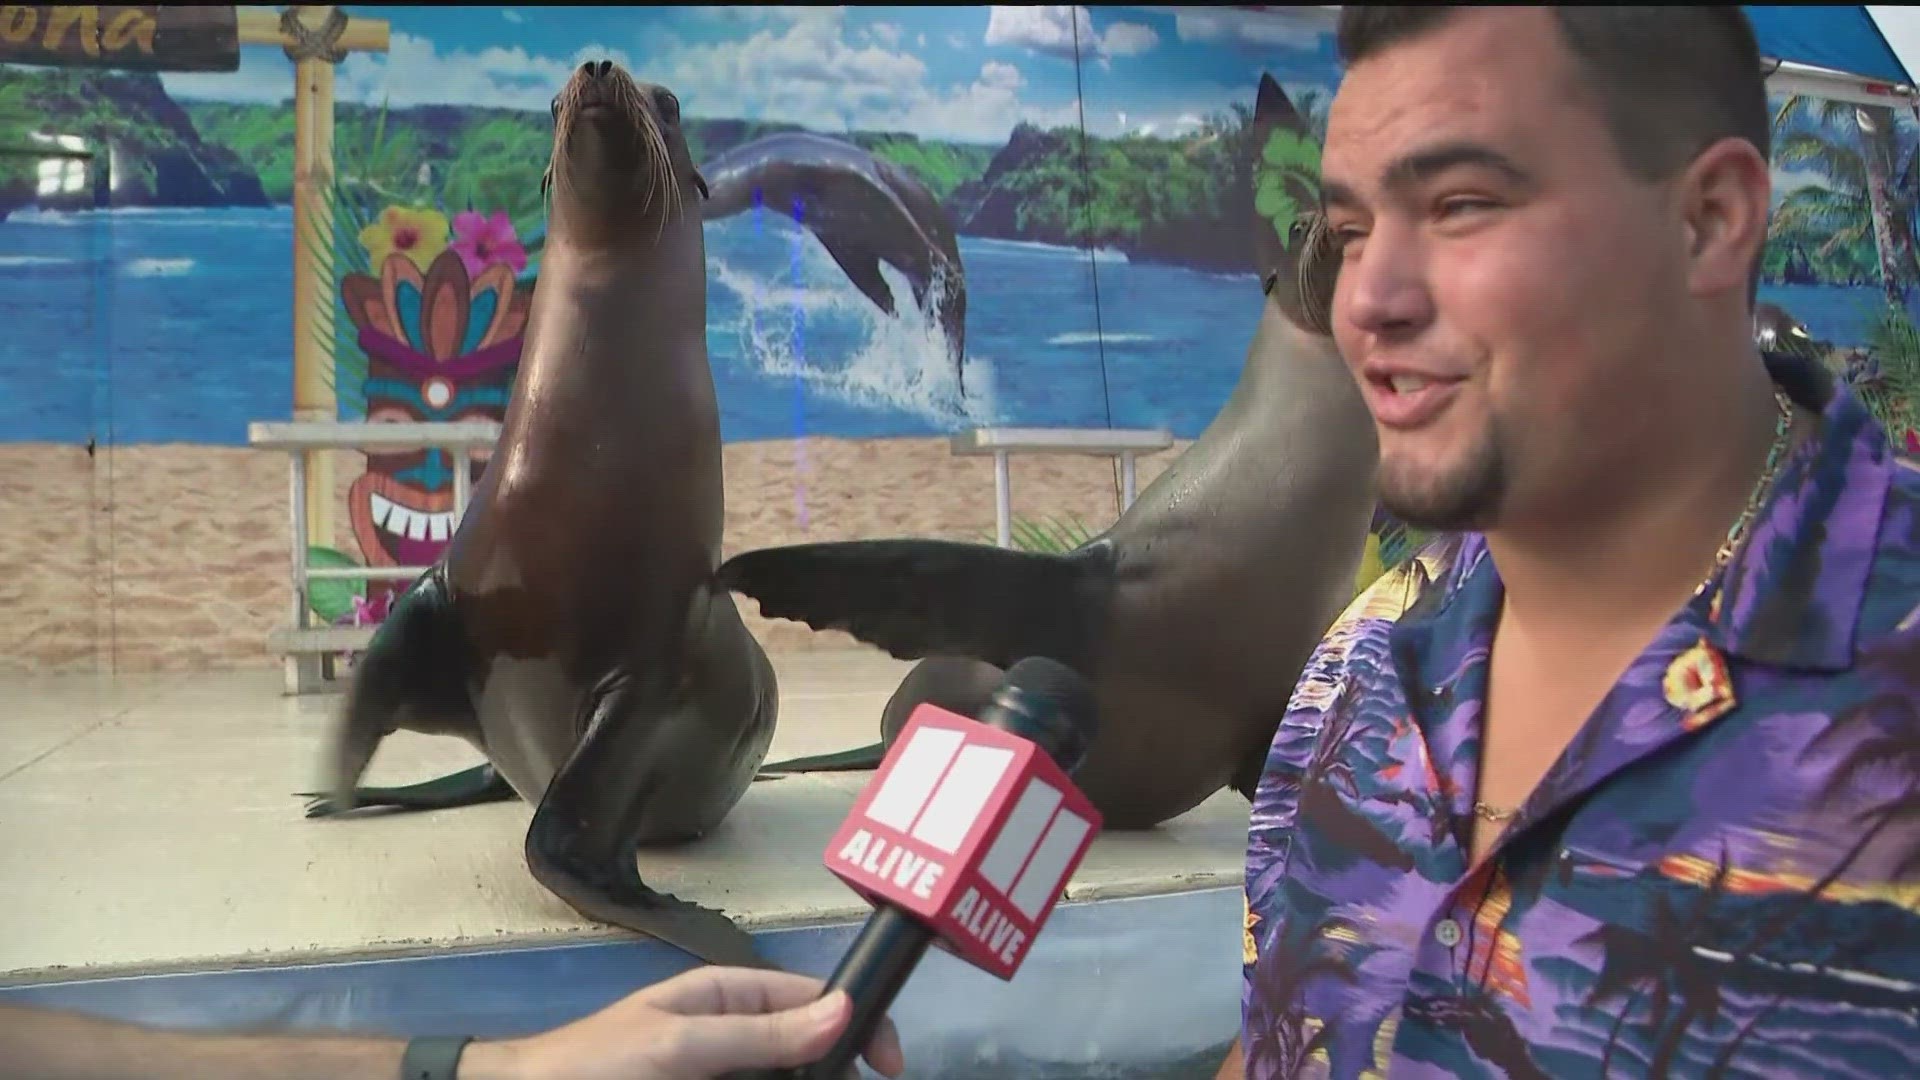 People can watch rescued sea lions show their stuff at the fair.